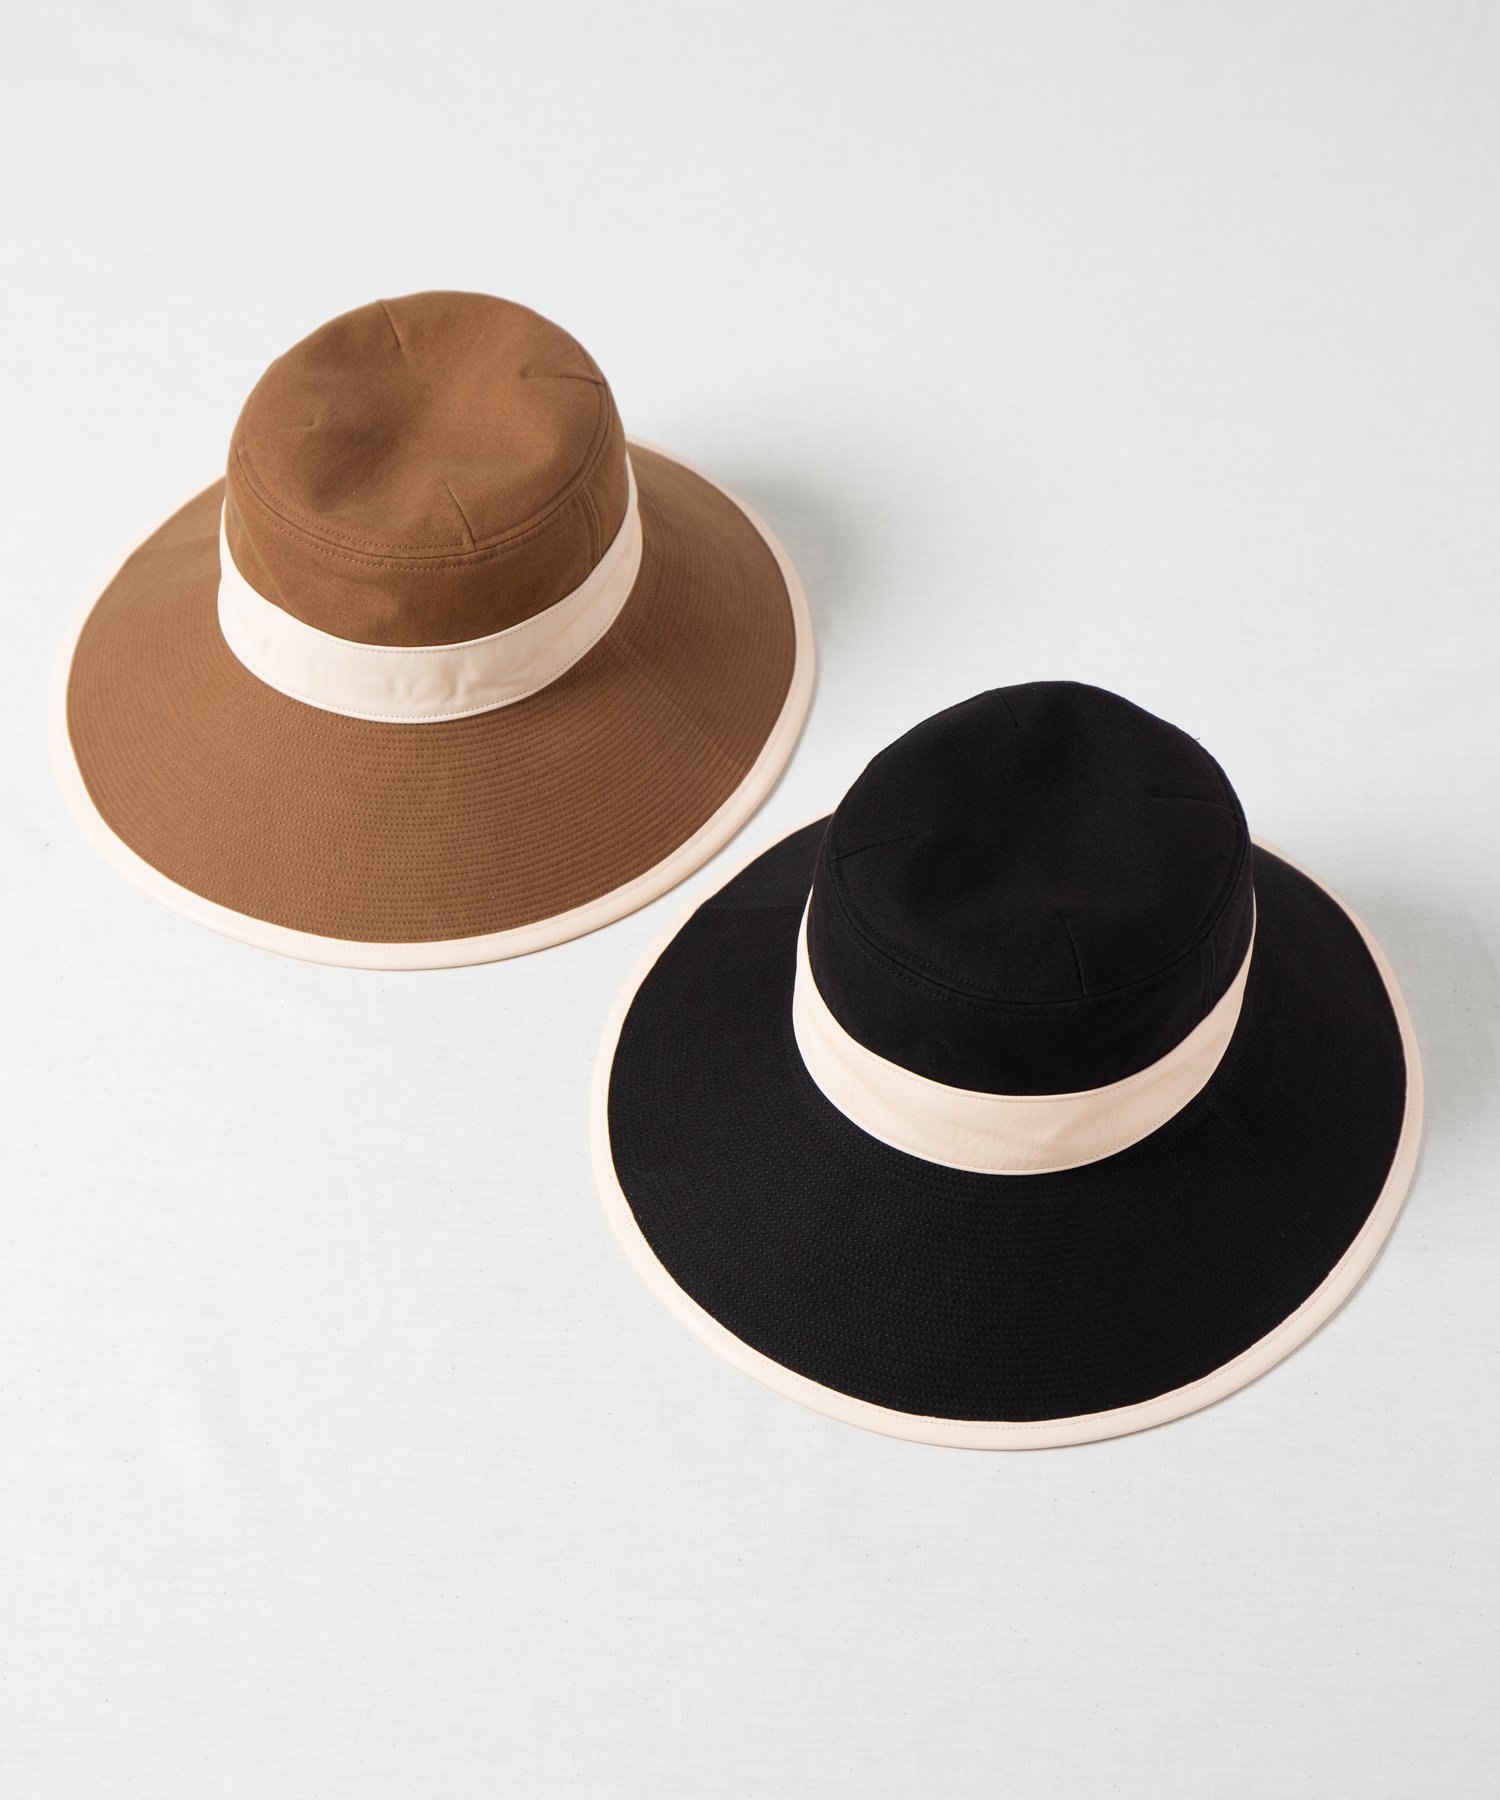 <img class='new_mark_img1' src='https://img.shop-pro.jp/img/new/icons20.gif' style='border:none;display:inline;margin:0px;padding:0px;width:auto;' />Indietro Association Sun Hat 041 サンハット